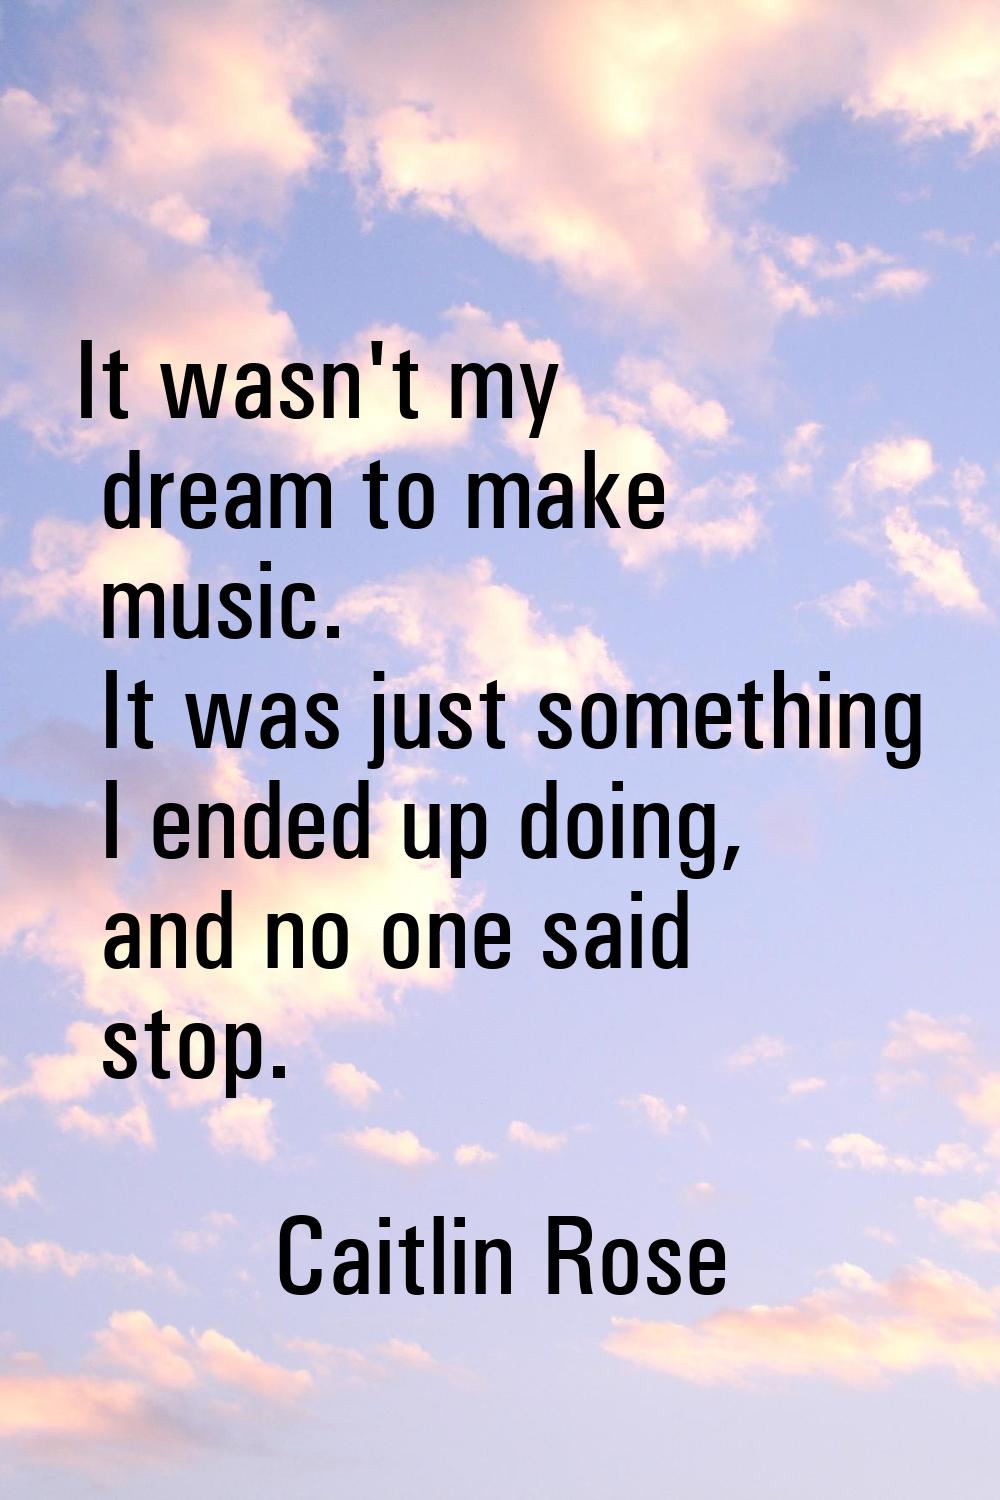 It wasn't my dream to make music. It was just something I ended up doing, and no one said stop.